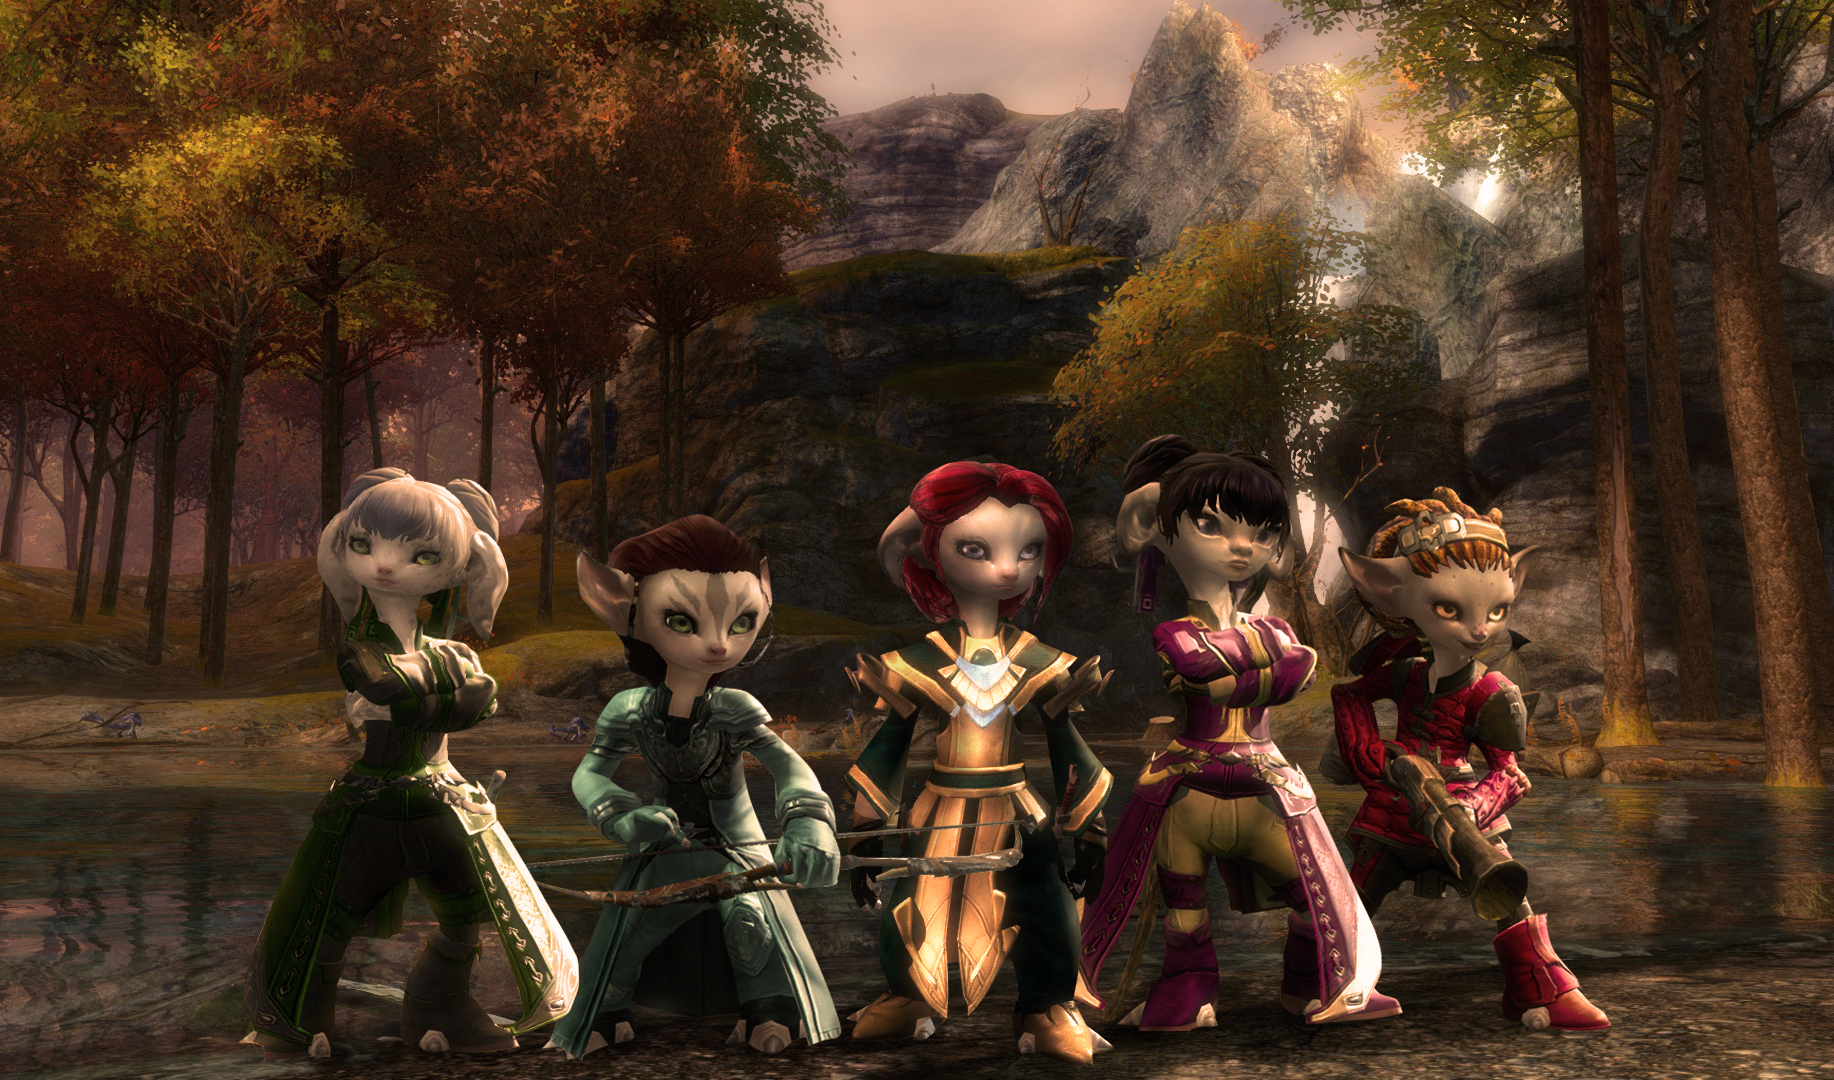 guild_wars_2__my_asura_chars_by_madt2-d5go5pg.jpg